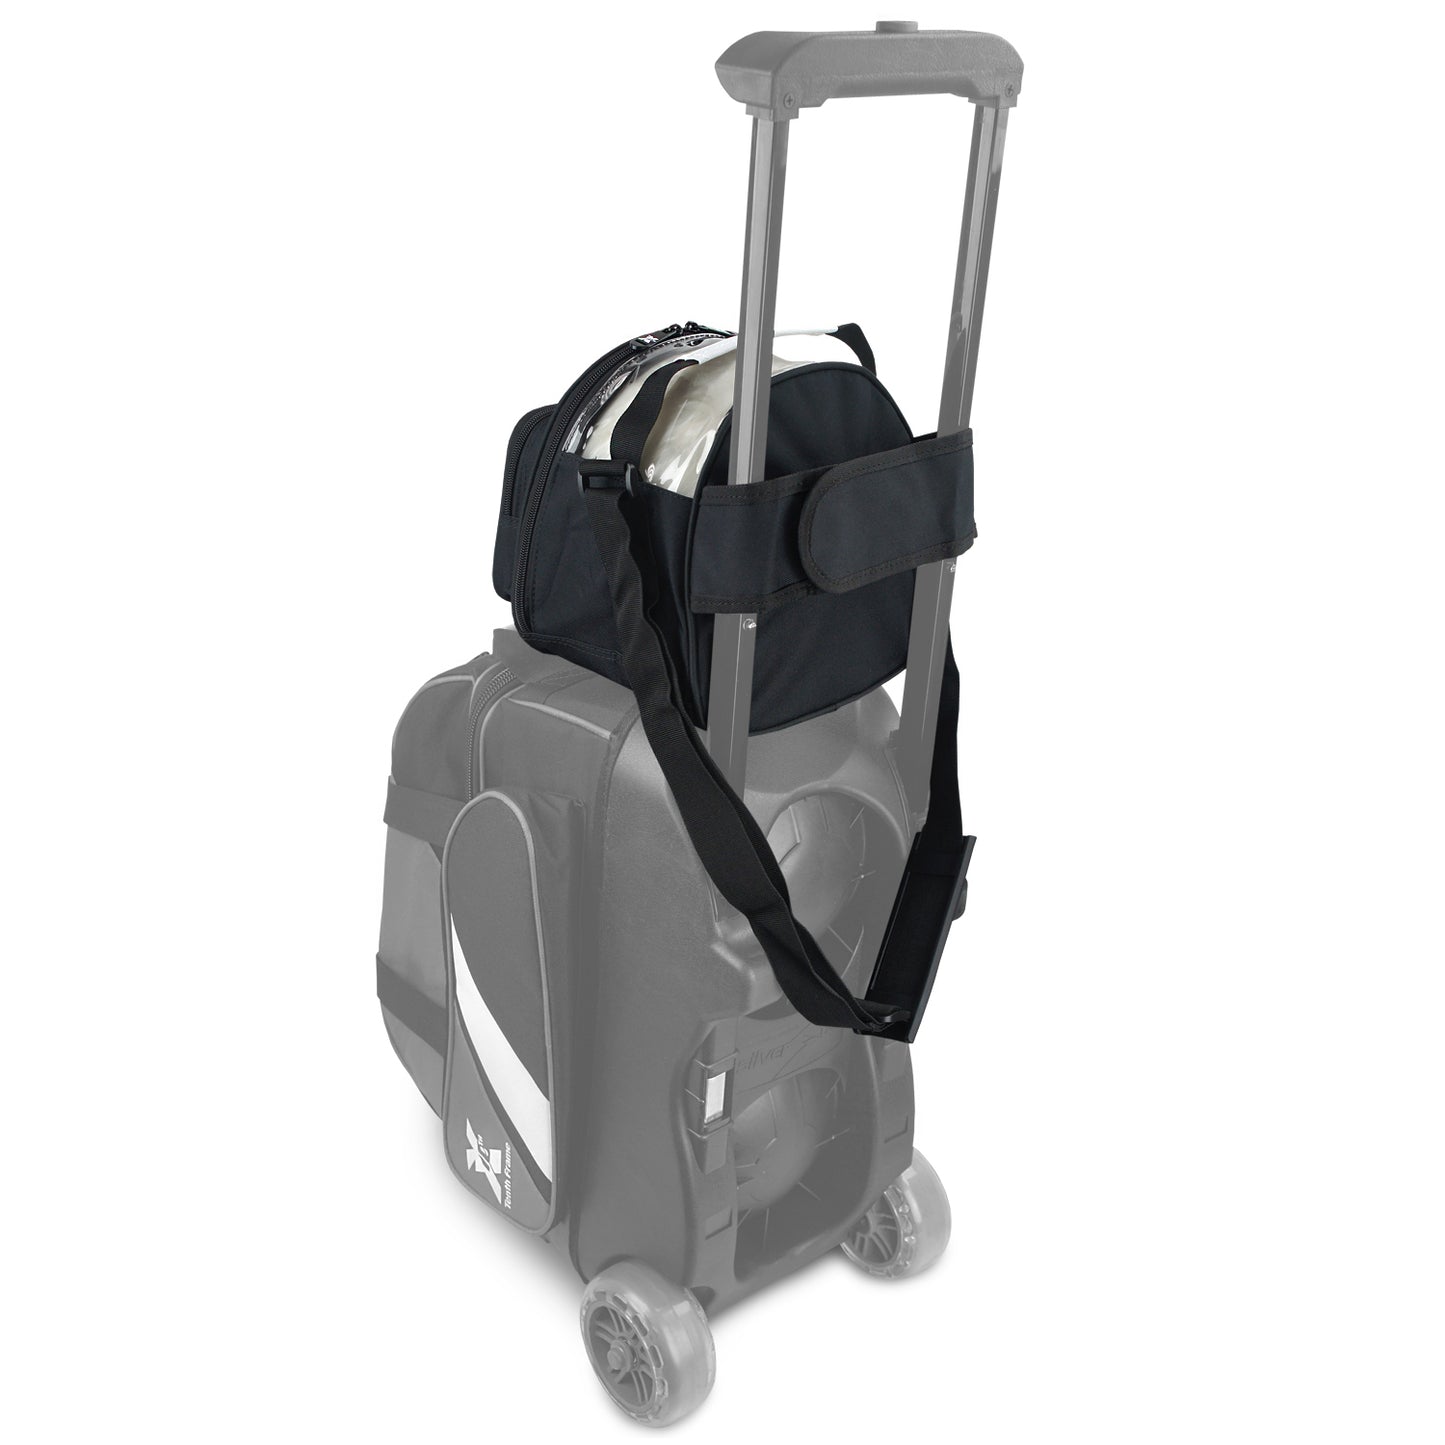 Tenth Frame Deluxe Add-On - 1 Ball Add-On Bowling Bag (Strapped on Roller Bag)